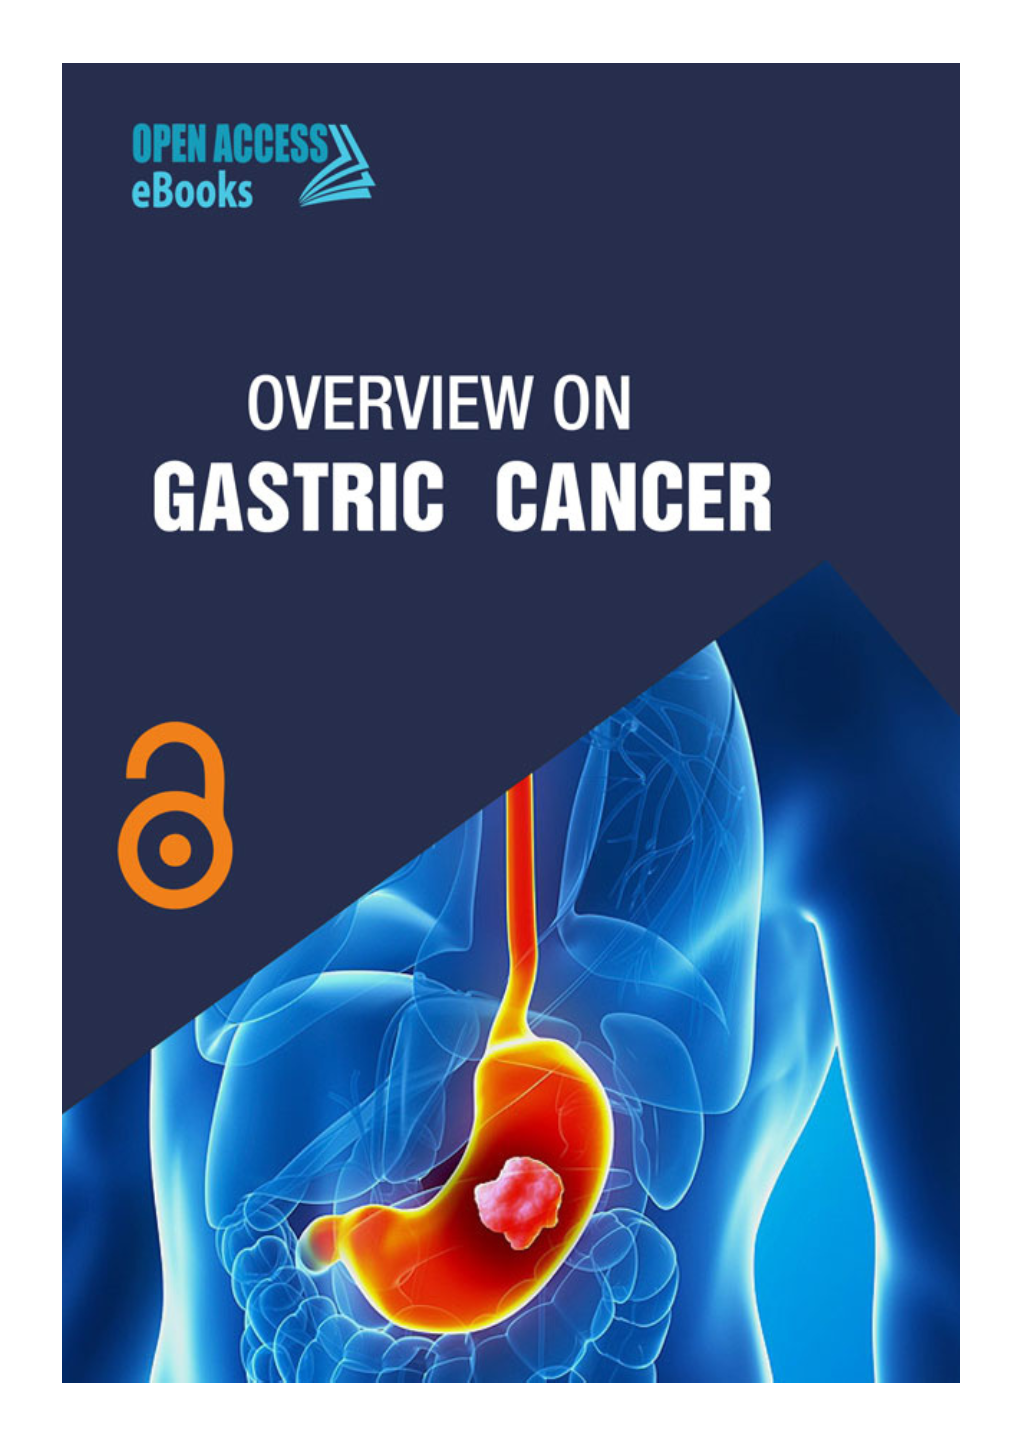 Overview on Gastric Cancer